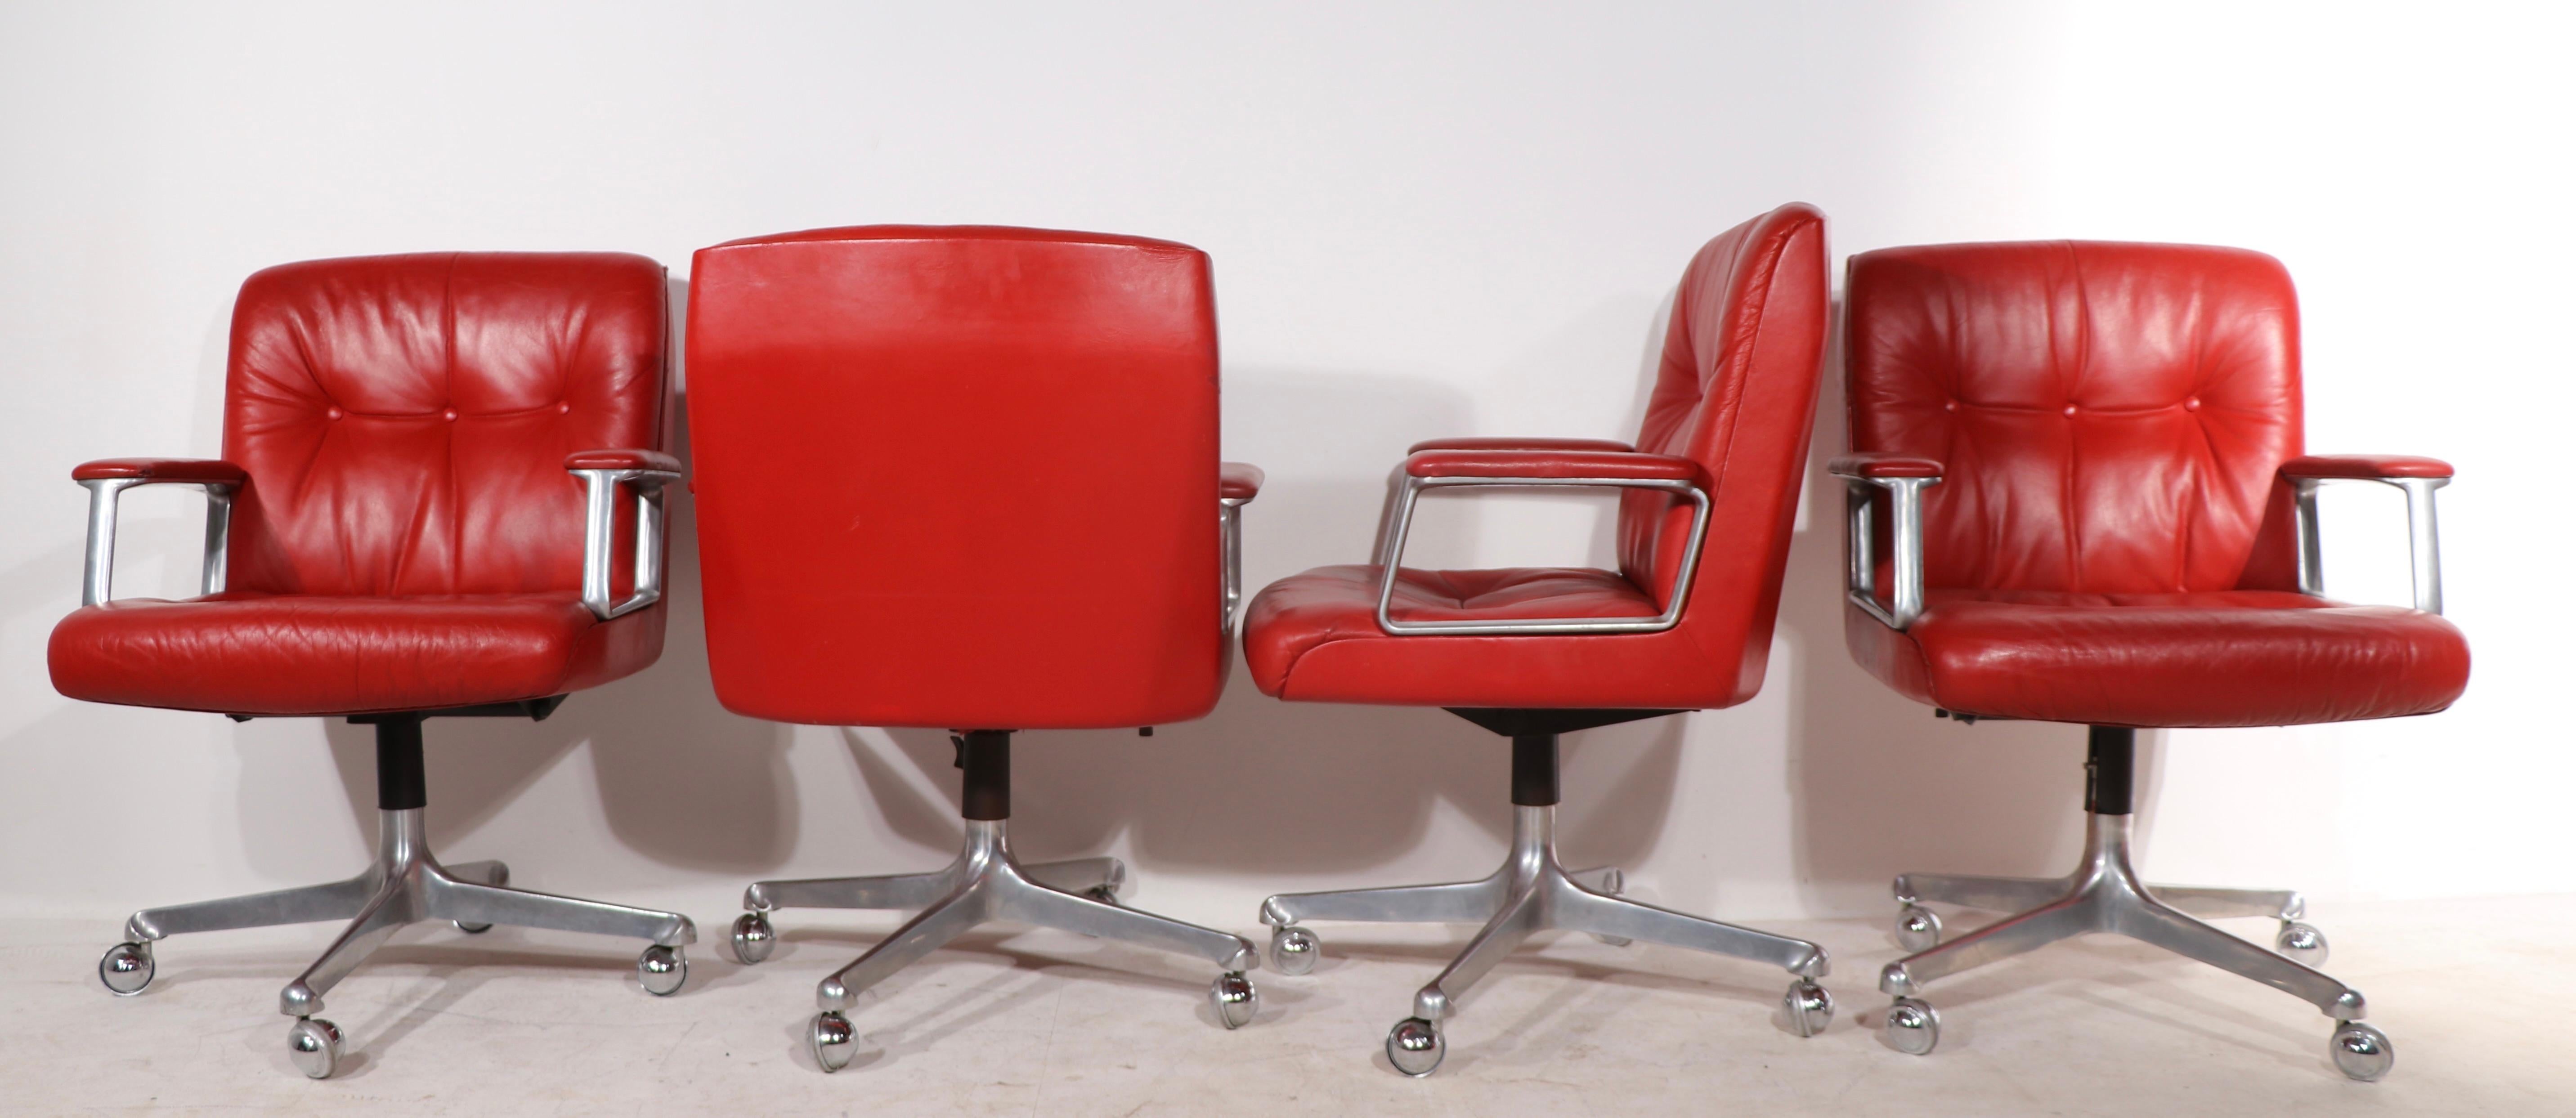 8 P128 Borsani Swivel Desk Chairs in Lipstick Red Leather Upholstery  3